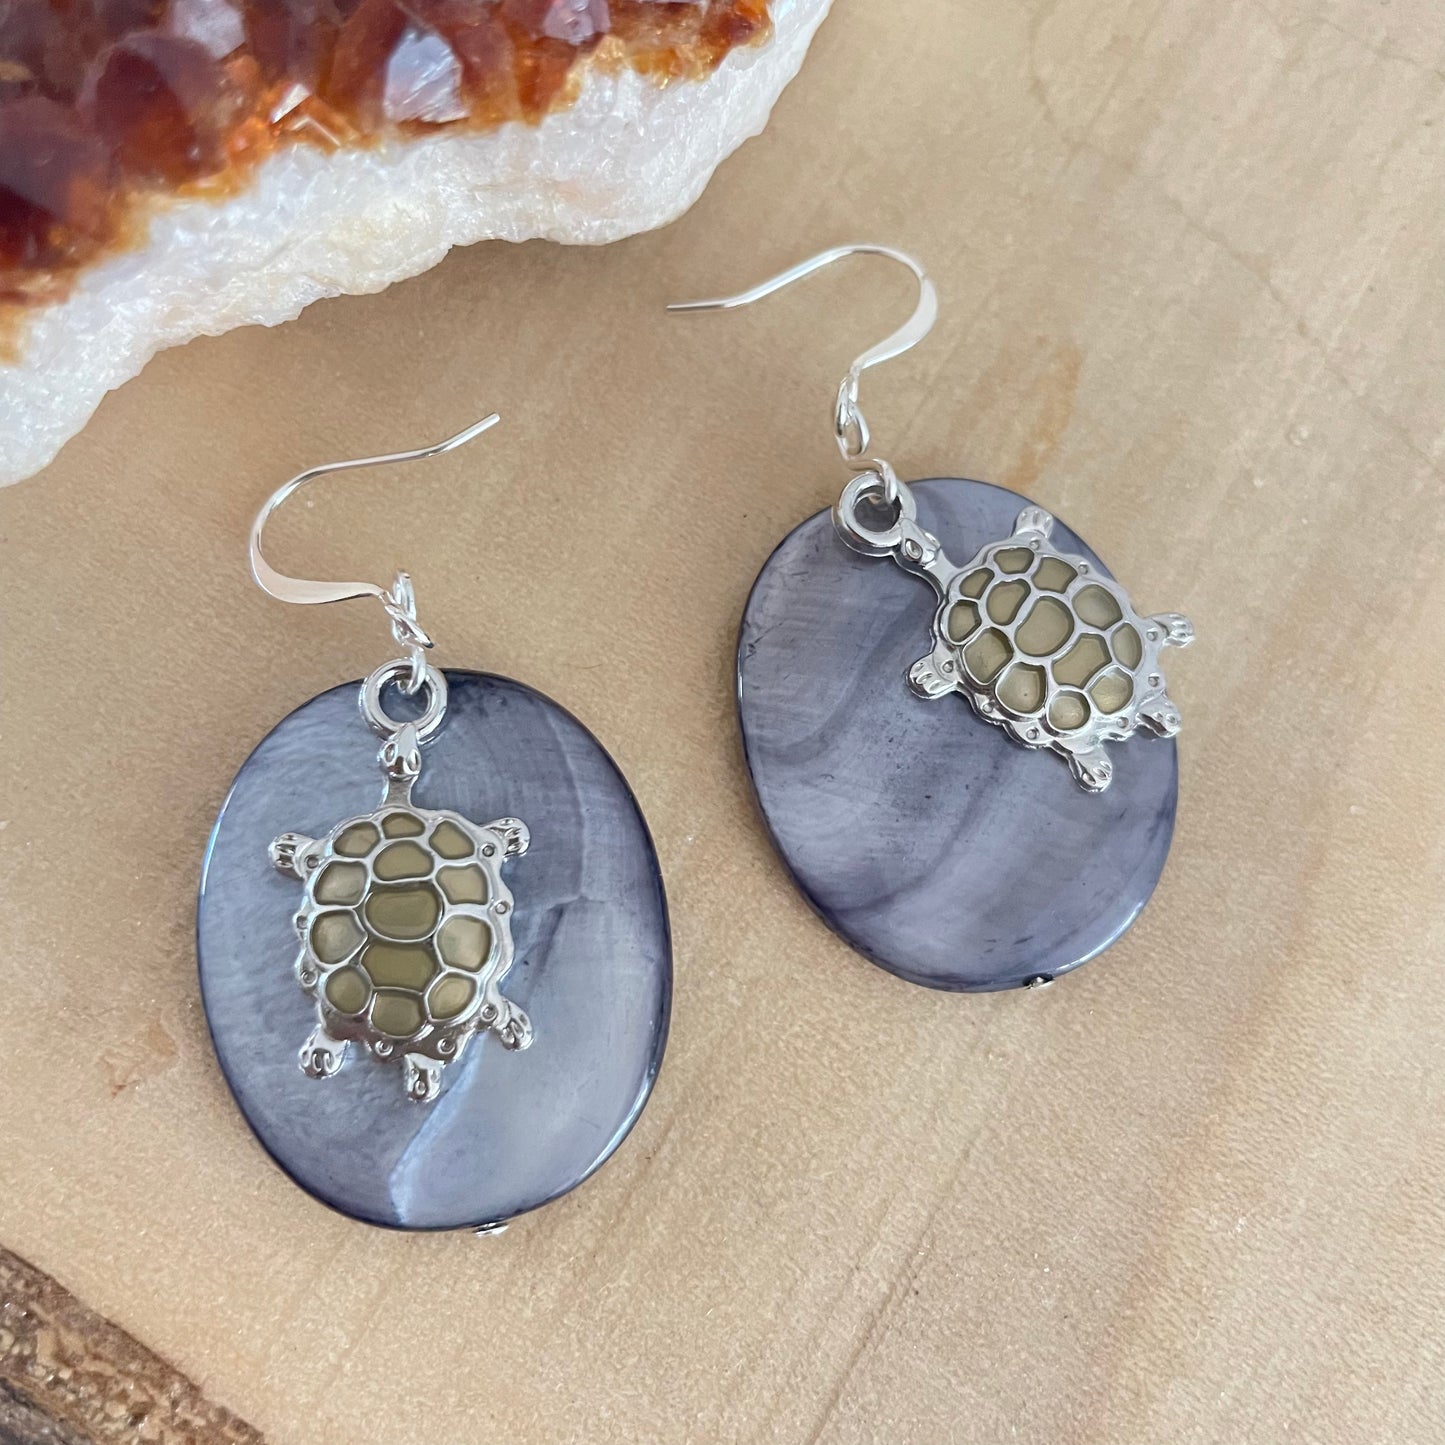 Iridescent Oval Shell & Mixed Metal Turtle Charm Earrings Handmade Geometric Large Statement Ocean Sea Life Gray Grey Silver Mother of Pearl